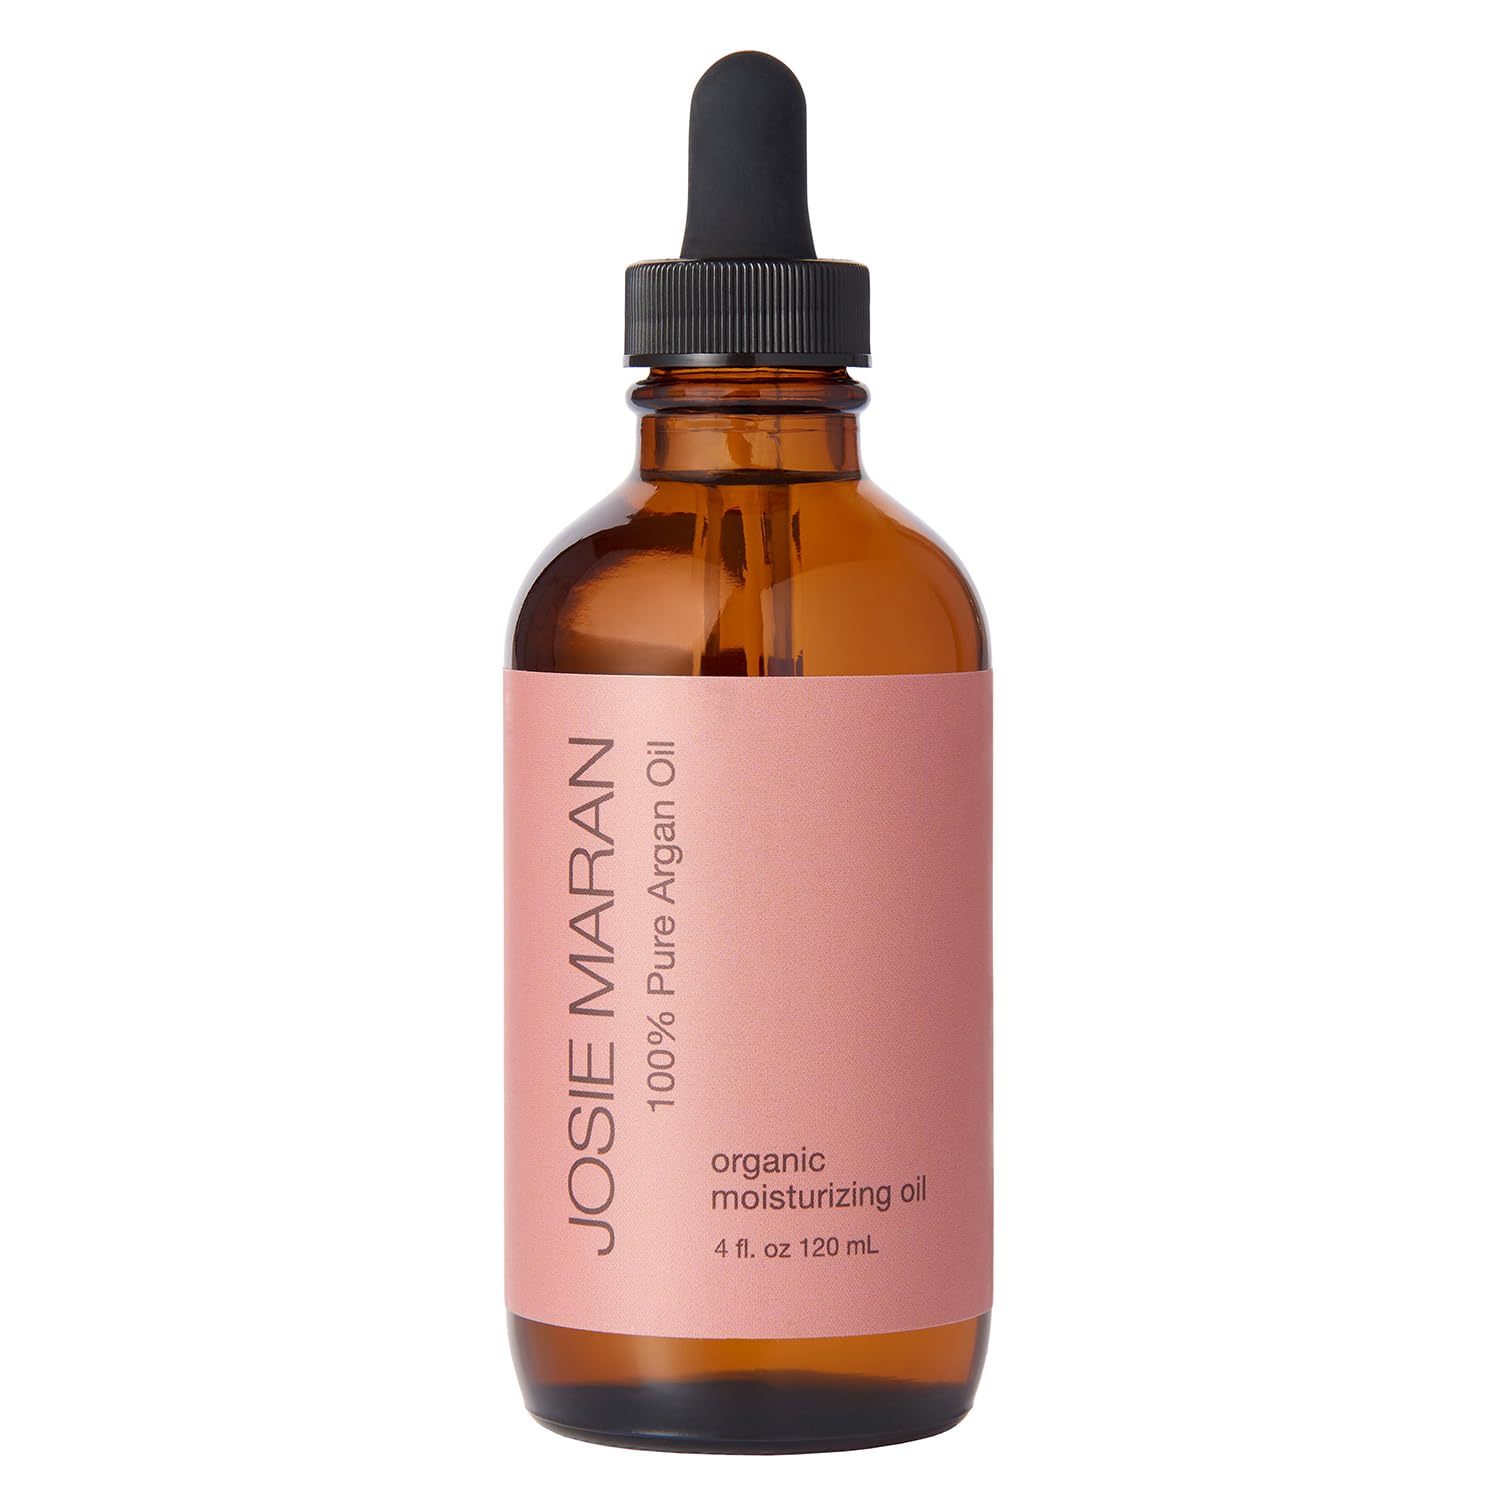 Josie Maran Argan Oil - Organic & Natural Skin Oil - Nourishes, Conditions, Improves Skin Firmess & Reduces the Look of Fine Lines & Wrinkles (120 ml)